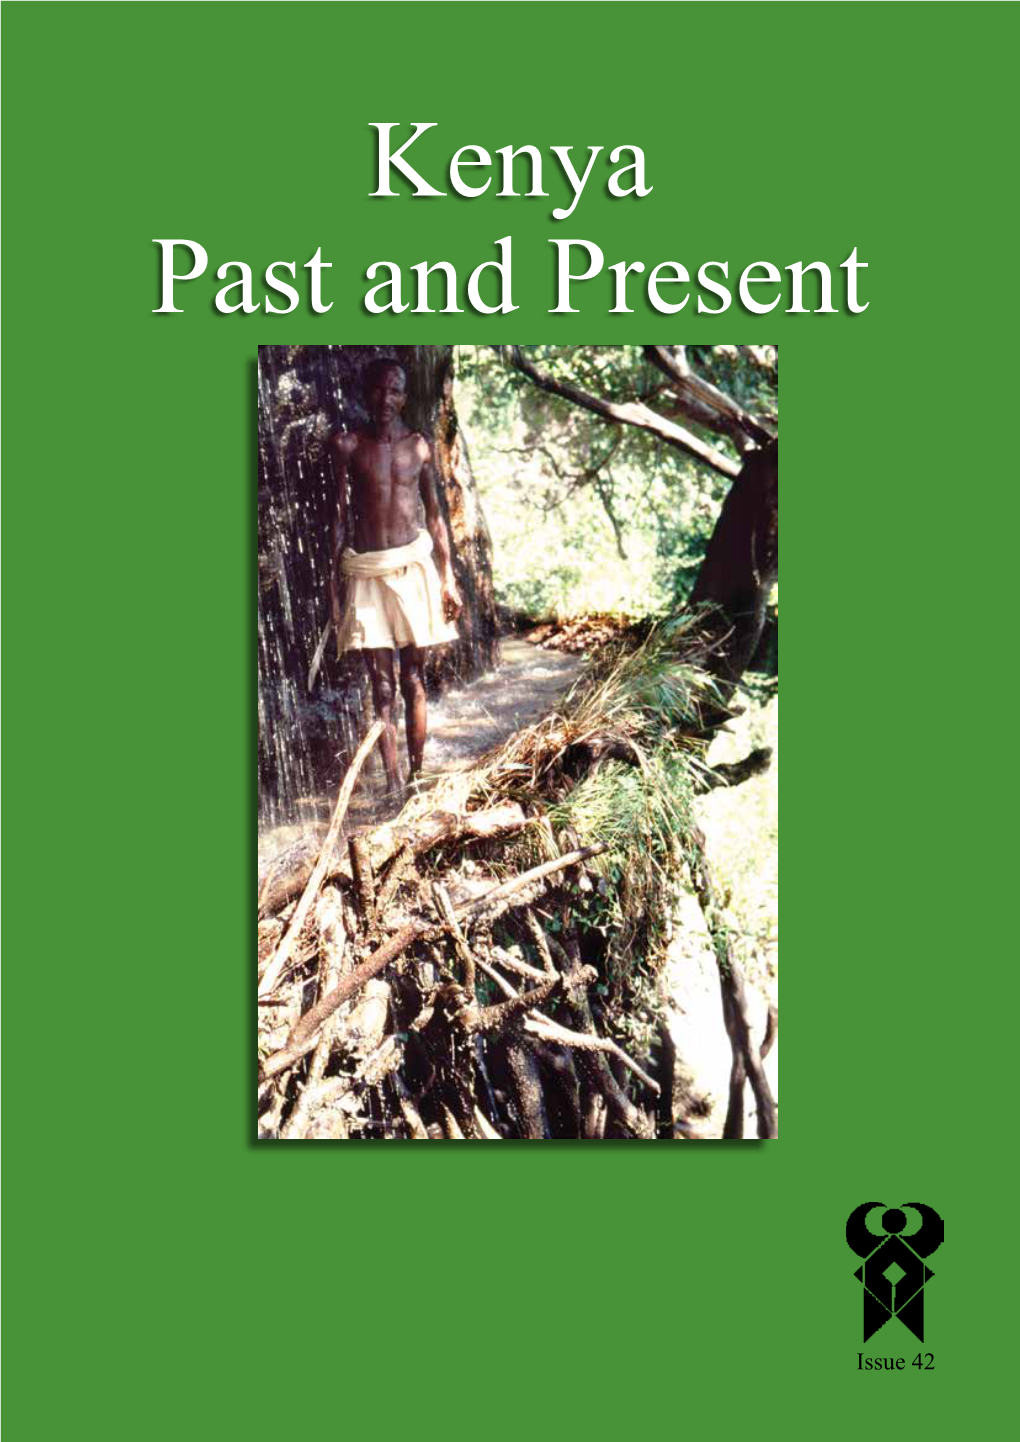 1842 KMS Kenya Past and Present Issue 42.Pdf